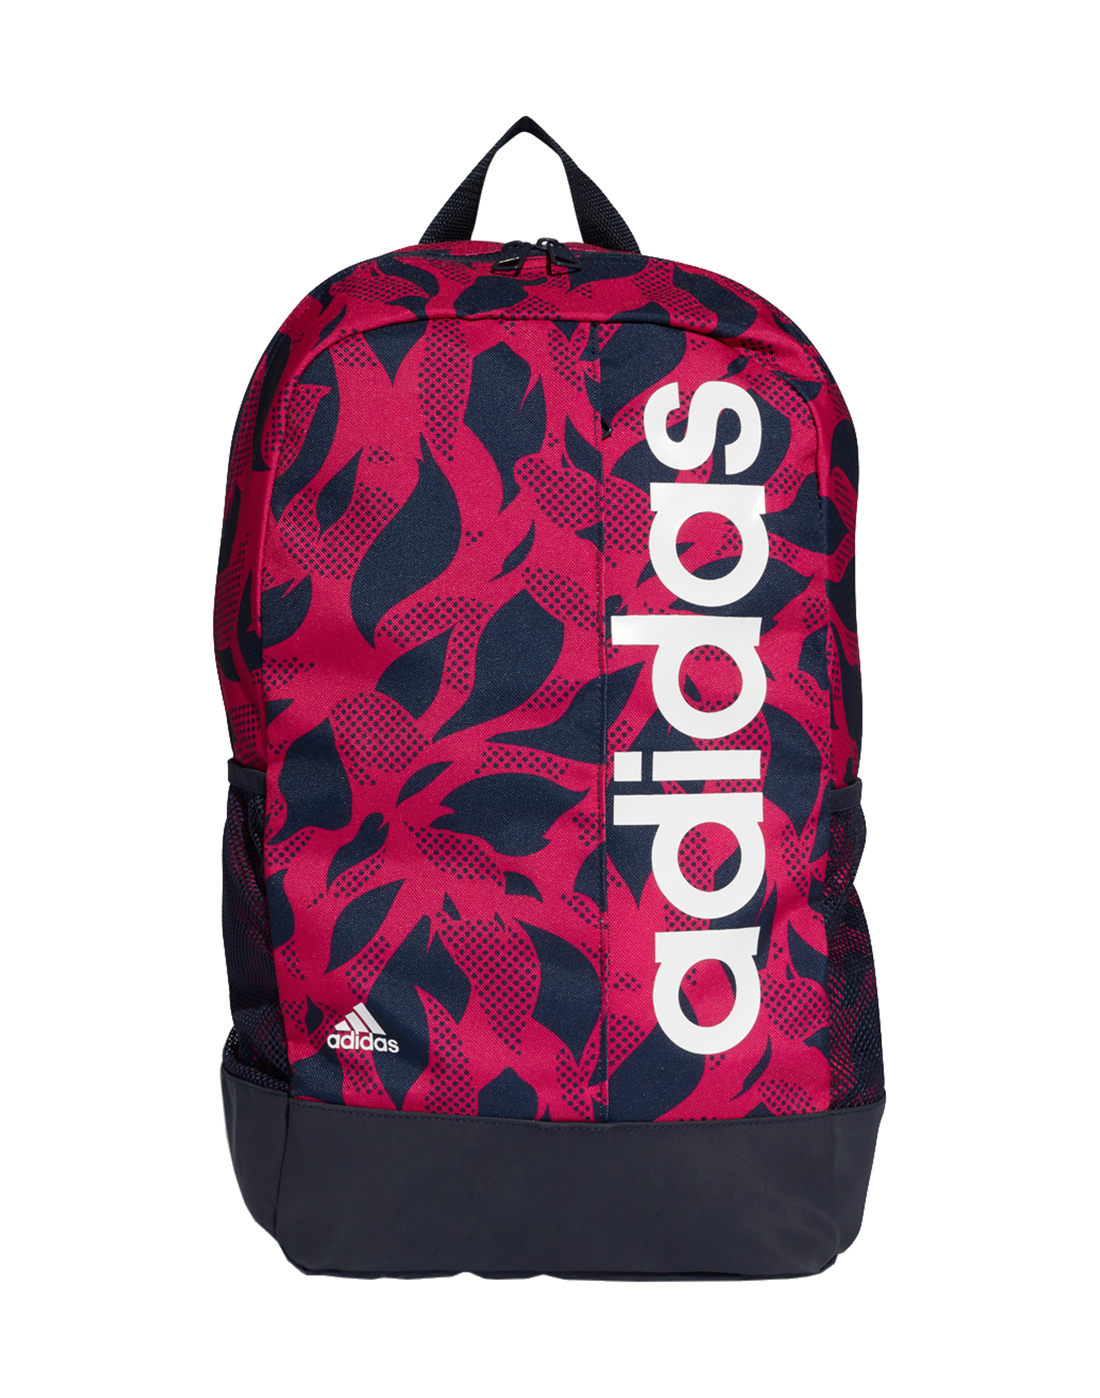 Red adidas Linear School Bag | Life Style Sports